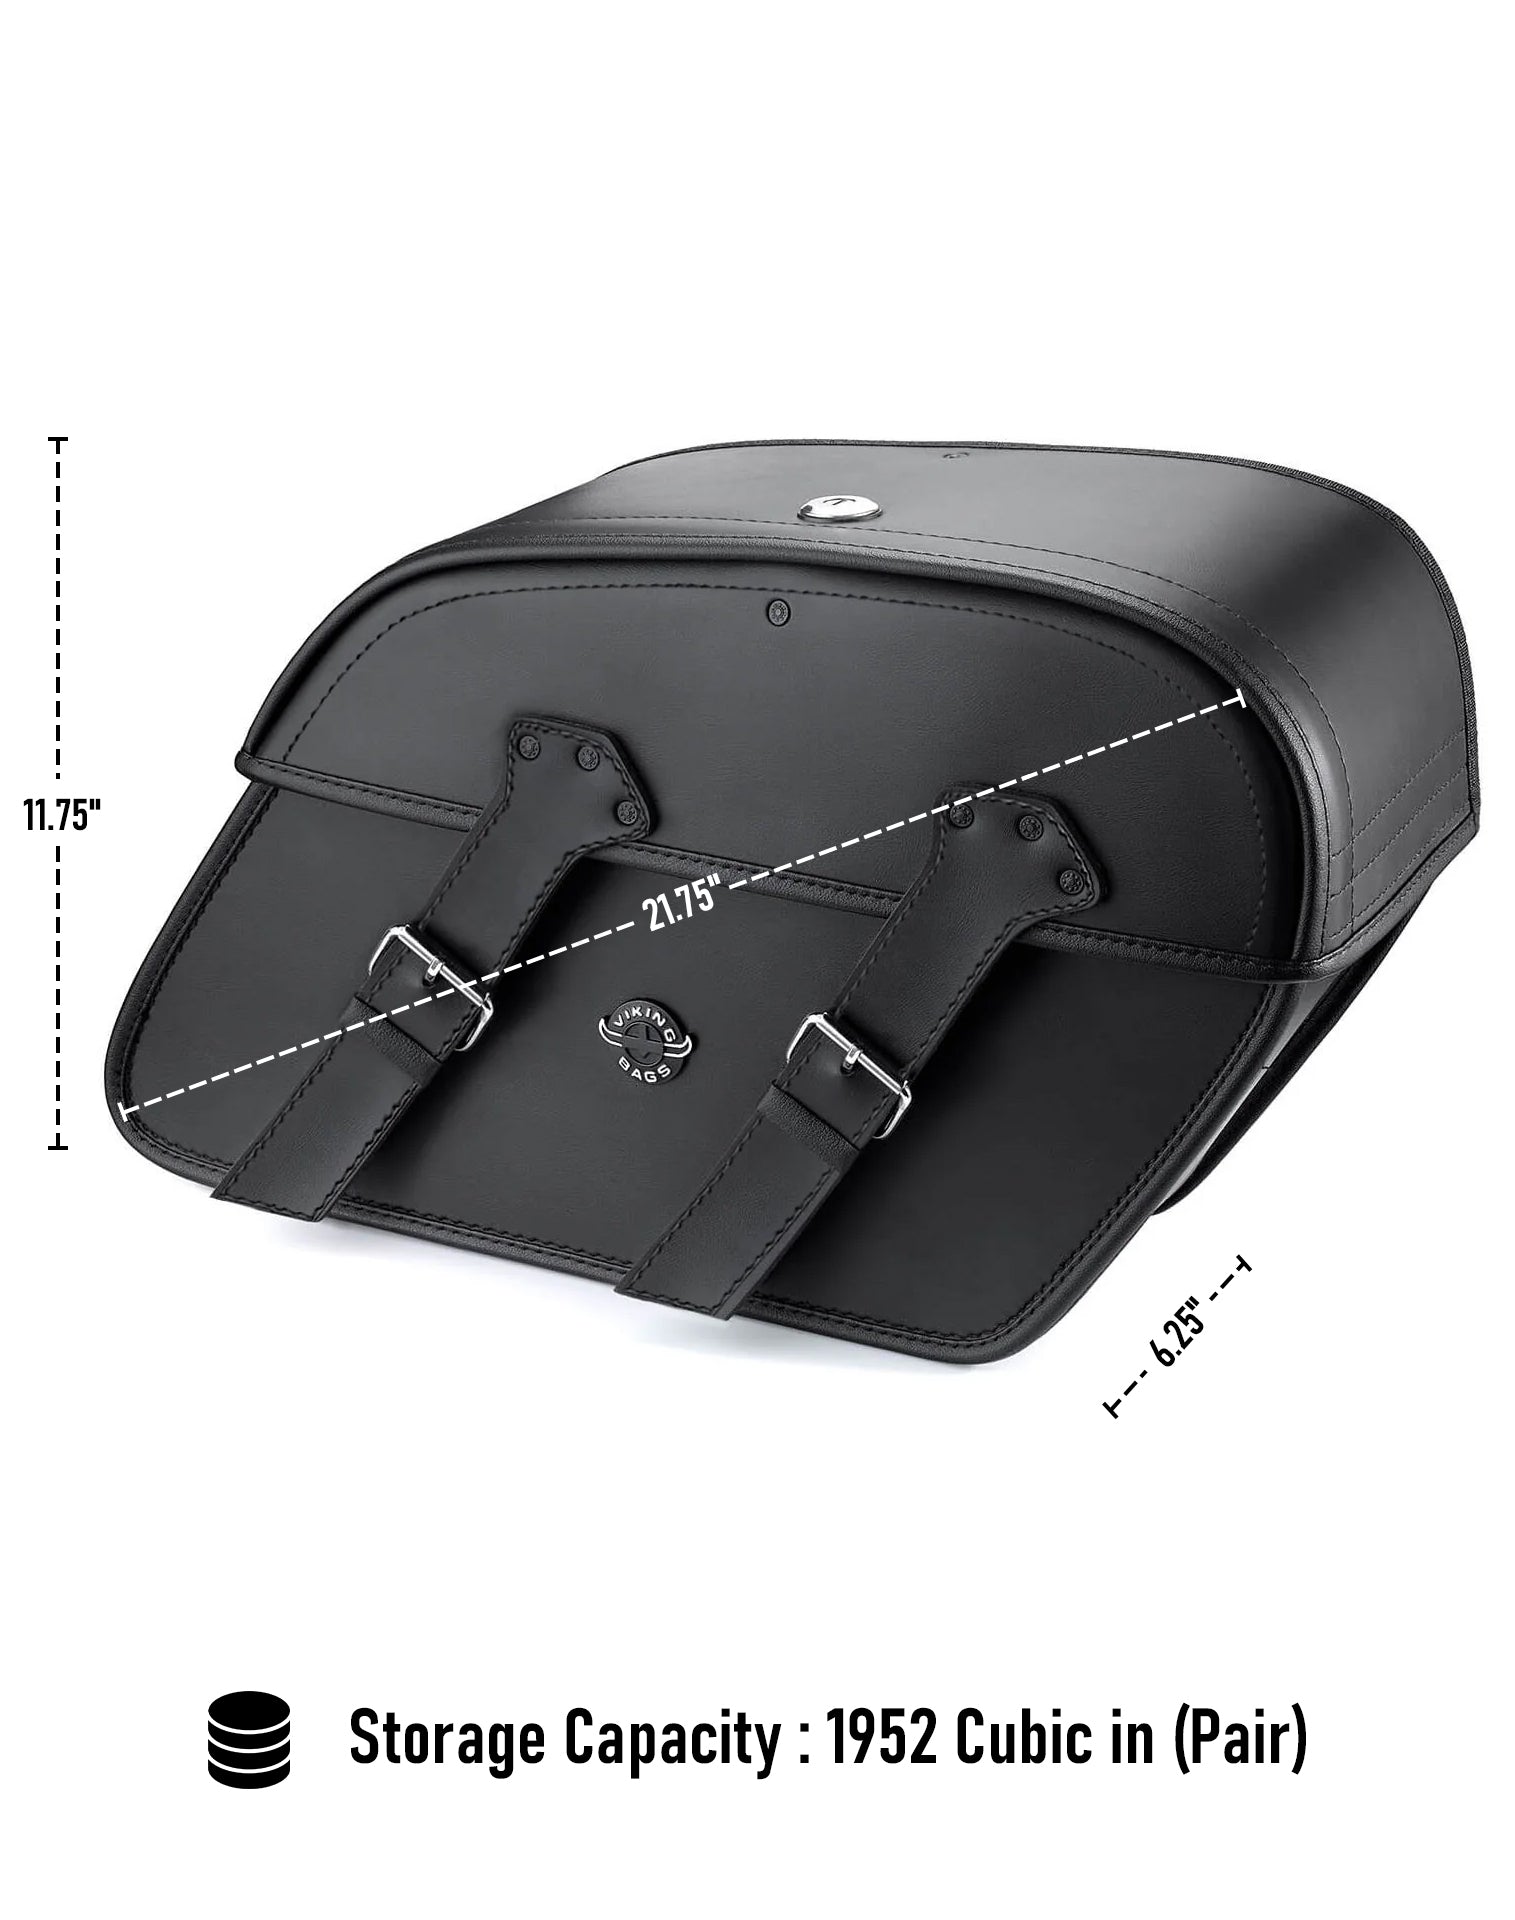 Viking Raven Large Triumph Rocket Iii Touring Motorcycle Leather Saddlebags Can Store Your Ridings Gears